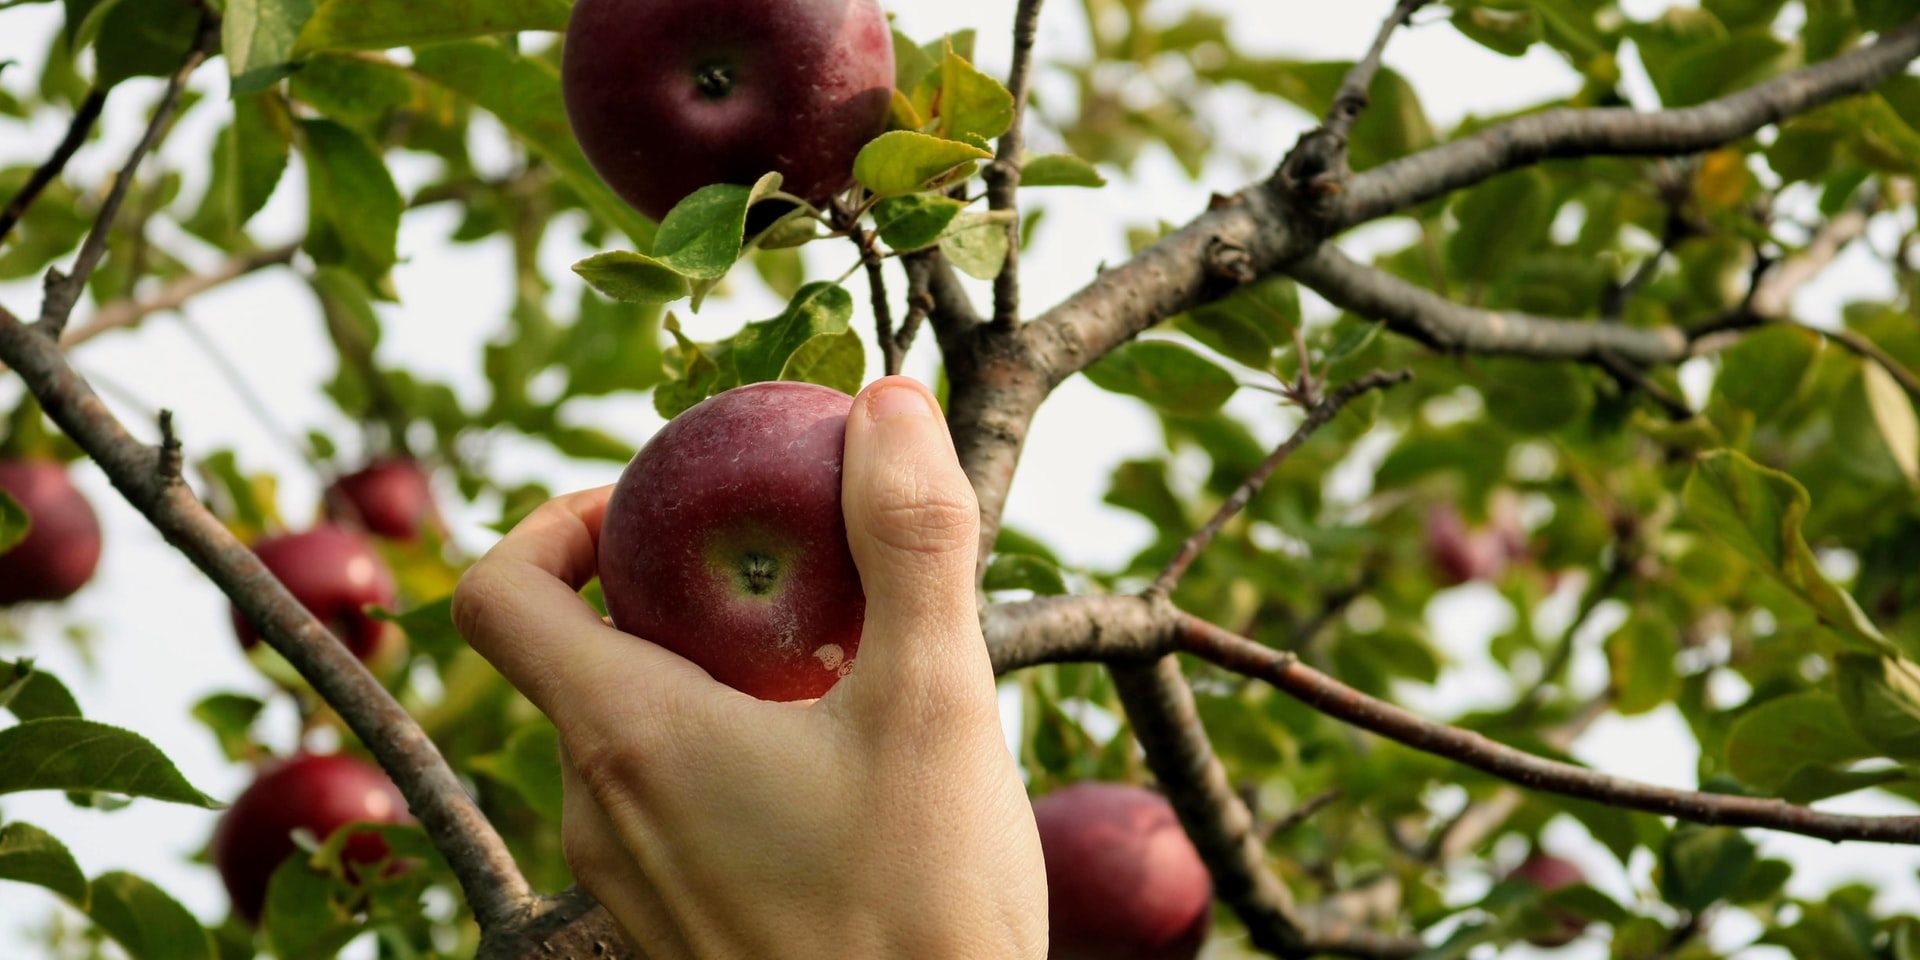 Hand picking fresh apples at an orchard